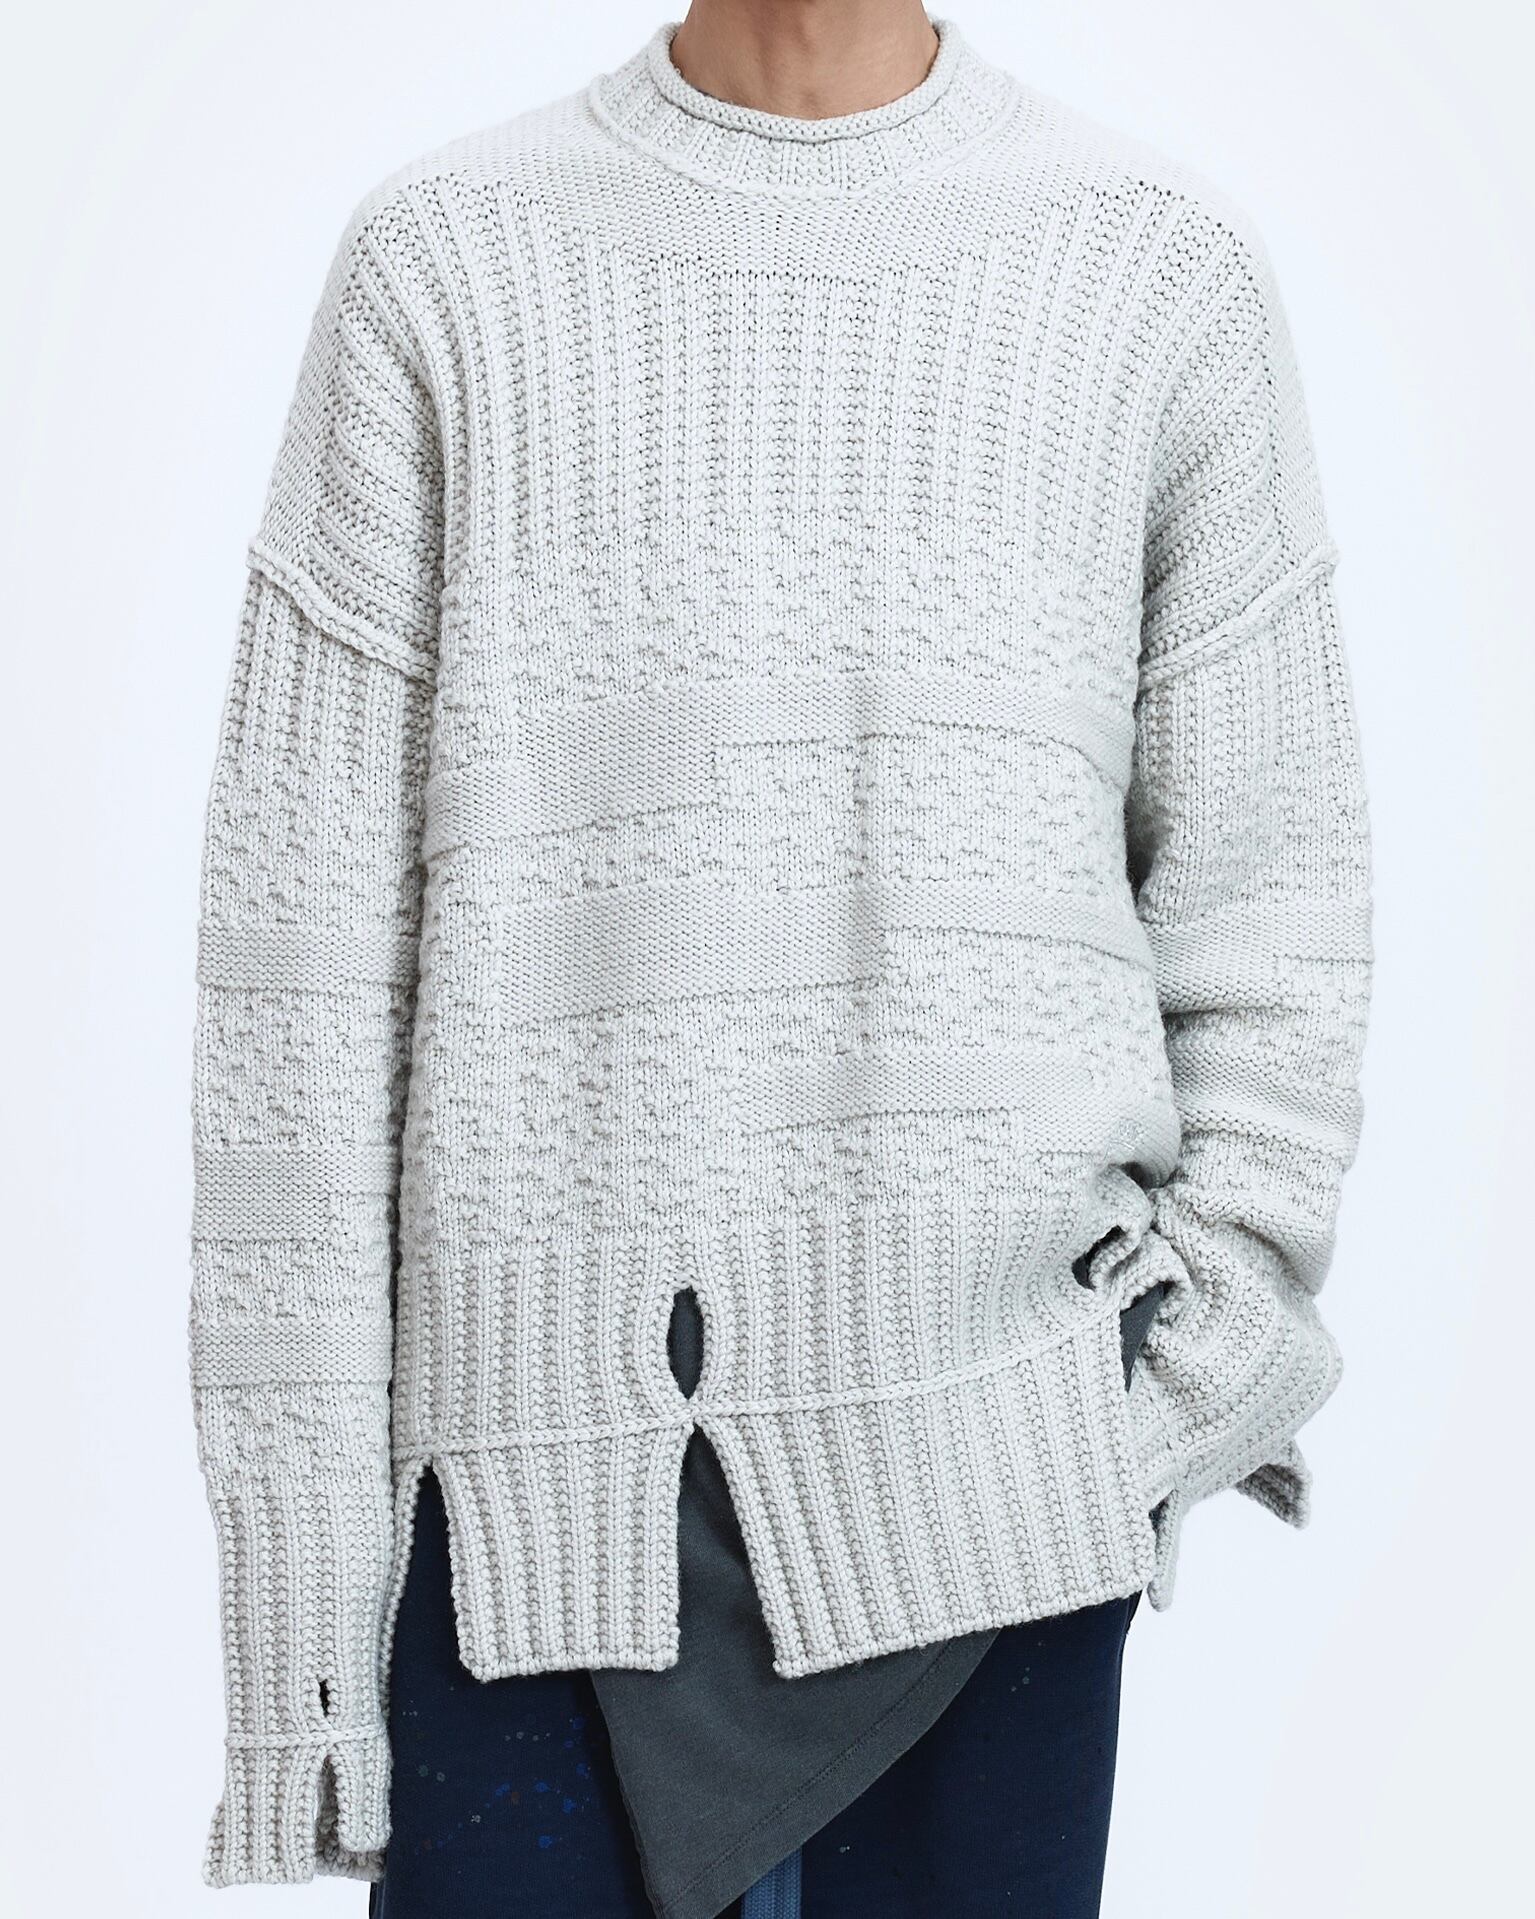 A-COLD-WALL* / TEXTURED MOCK NECK KNIT